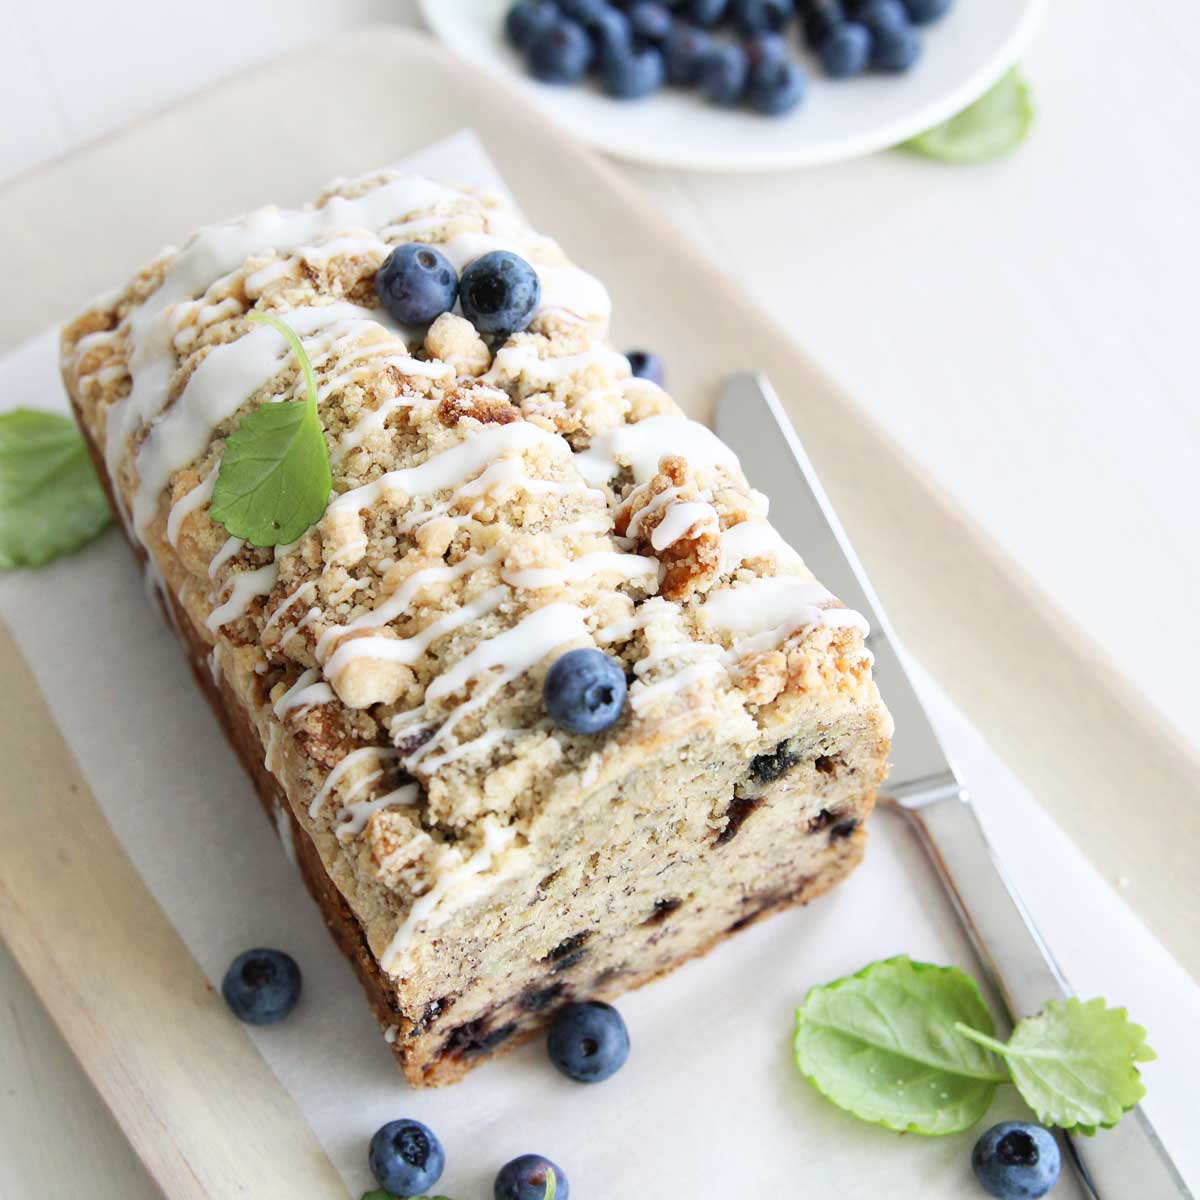 Blueberry Banana Bread with Oats & Streusel (Eggless, Dairy Free) - Peppermint Whipped Cream